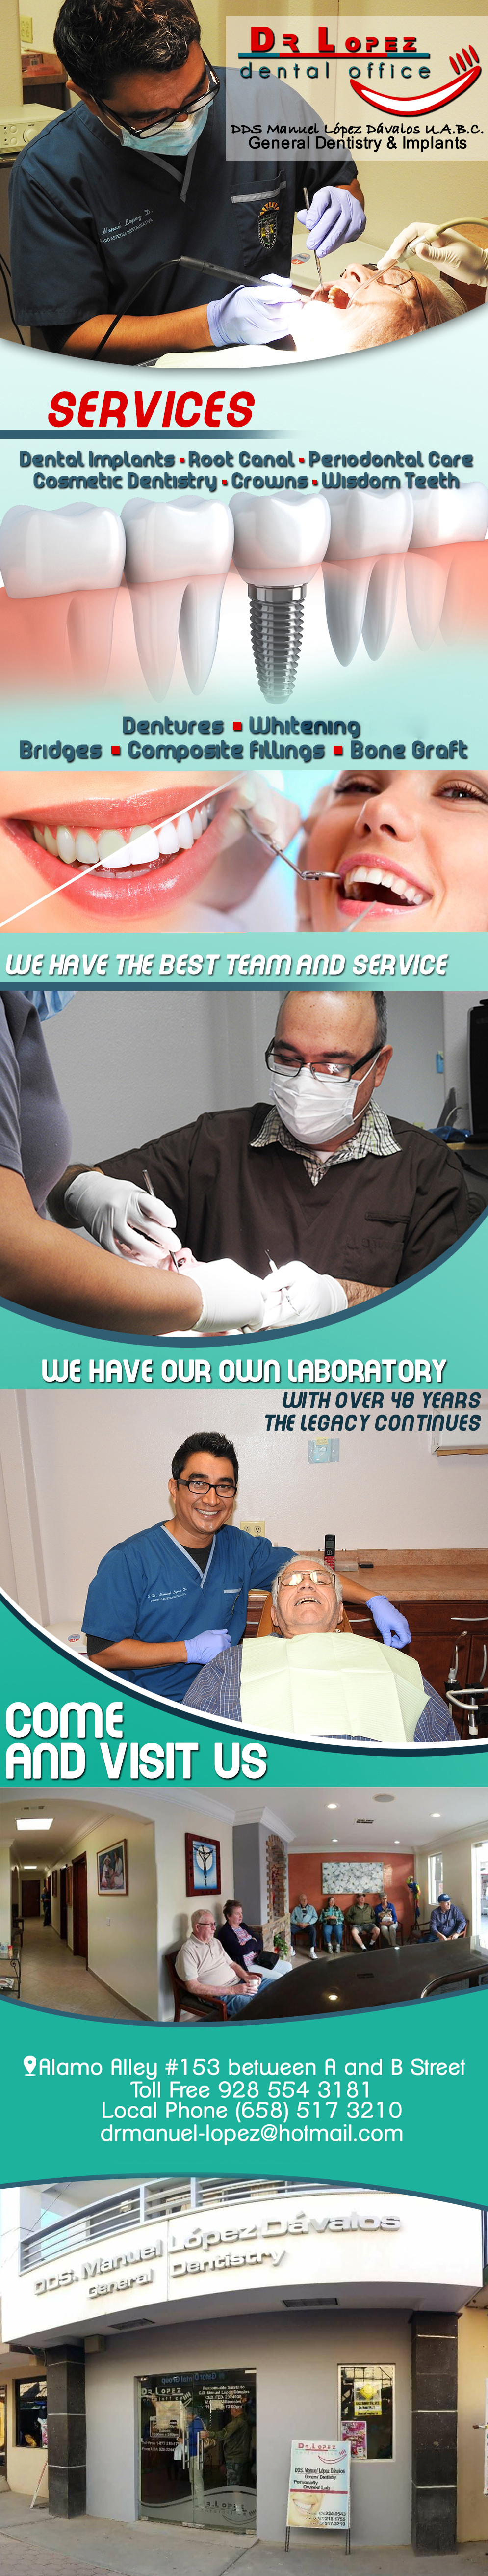 DR. LOPEZ DENTAL OFFICE. Manuel Lopez Davalos DDS-OWN LABORATORY,COSMETIC DENTAL IMPLANTS, ROOT CANAL, PERIODONTAL CARE, COSMETIC DENTISTRY, CROWNS, WISDOM TEETH, DENTURES, BRIDGES, COMPOSITE FILLINGS, BONE GRAFT.  WE HAVE THE BEST TEAM AND SERVICE.                        